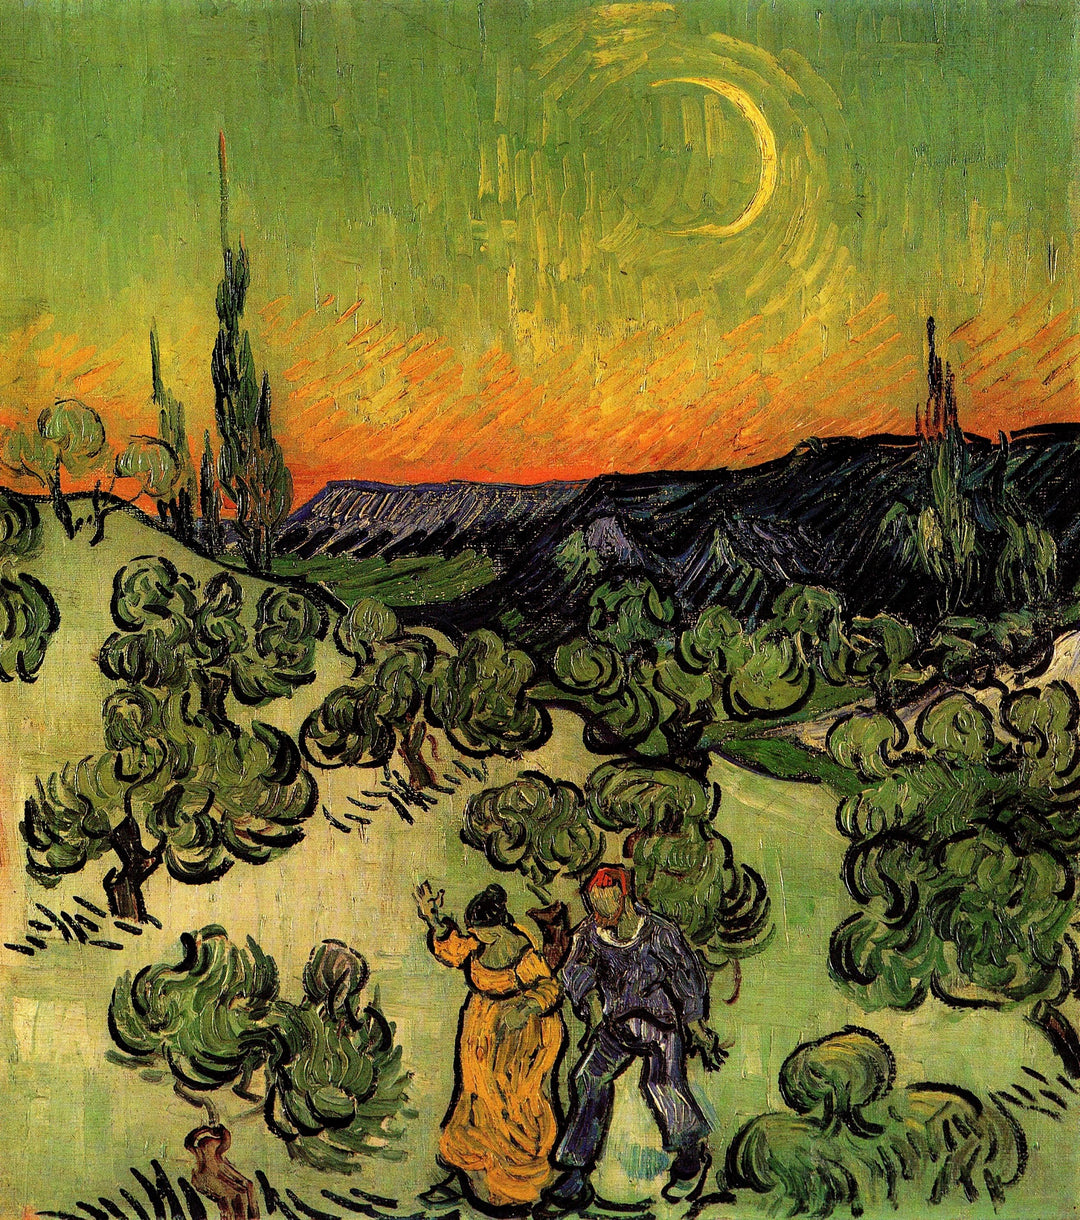 Landscape with Couple Walking and Crescent Moon, 1890 by Van Gogh Reproduction for Sale - Blue Surf Art